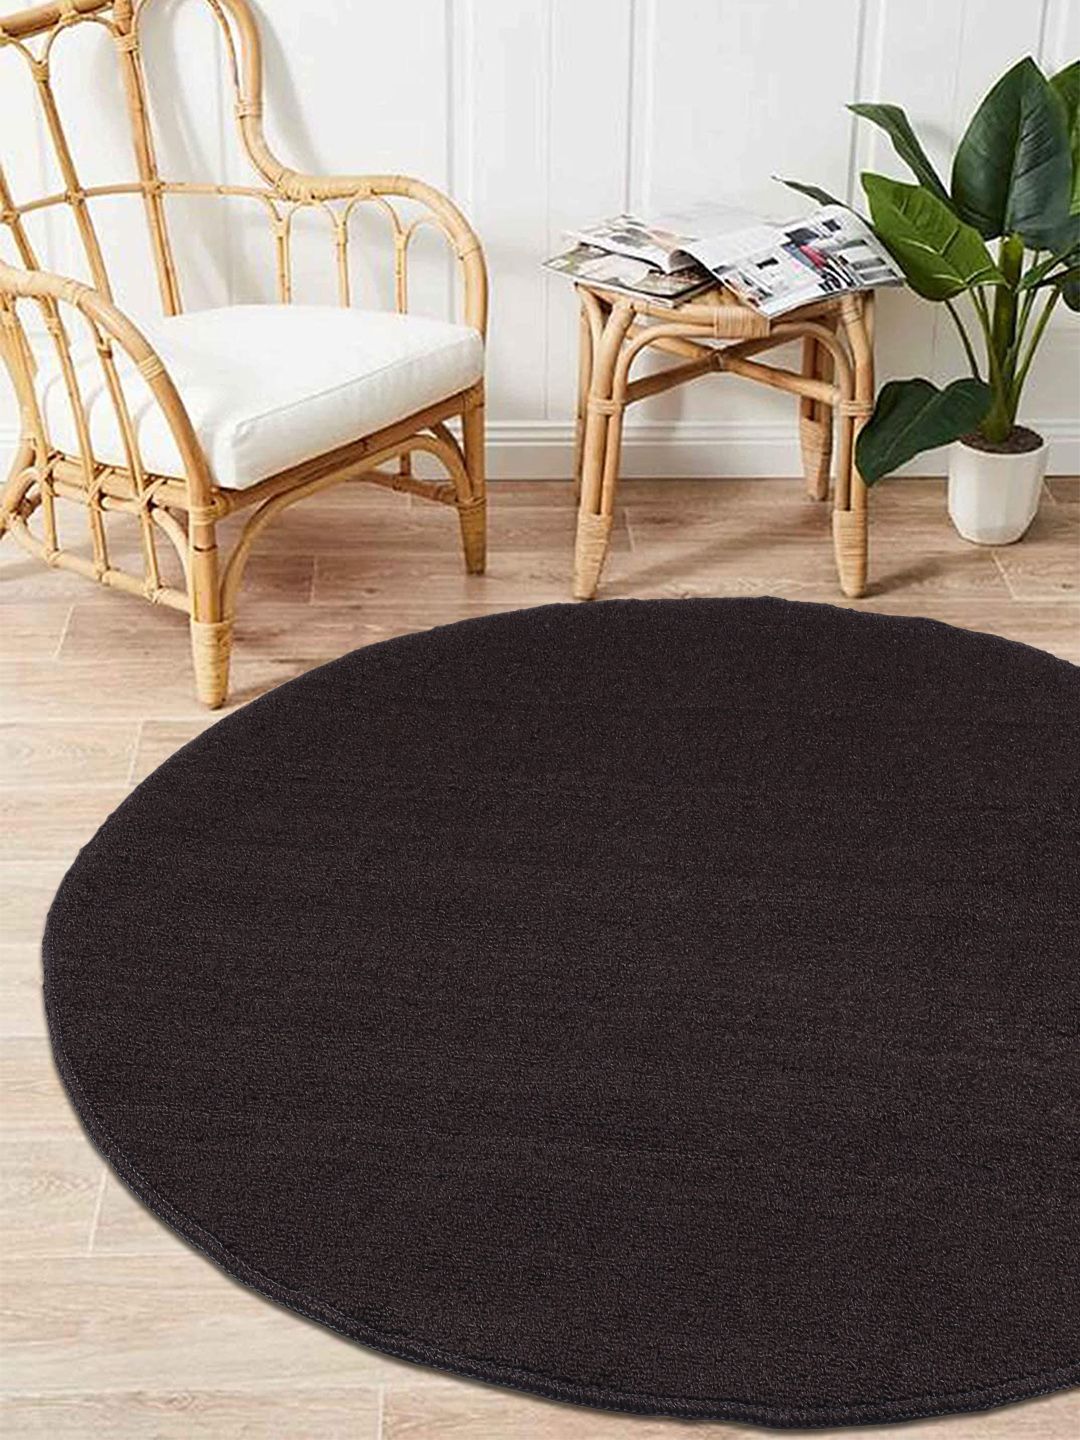 Saral Home Brown Solid PP-Yarn Round Anti-Skid Multi-Use Floor Mat Price in India